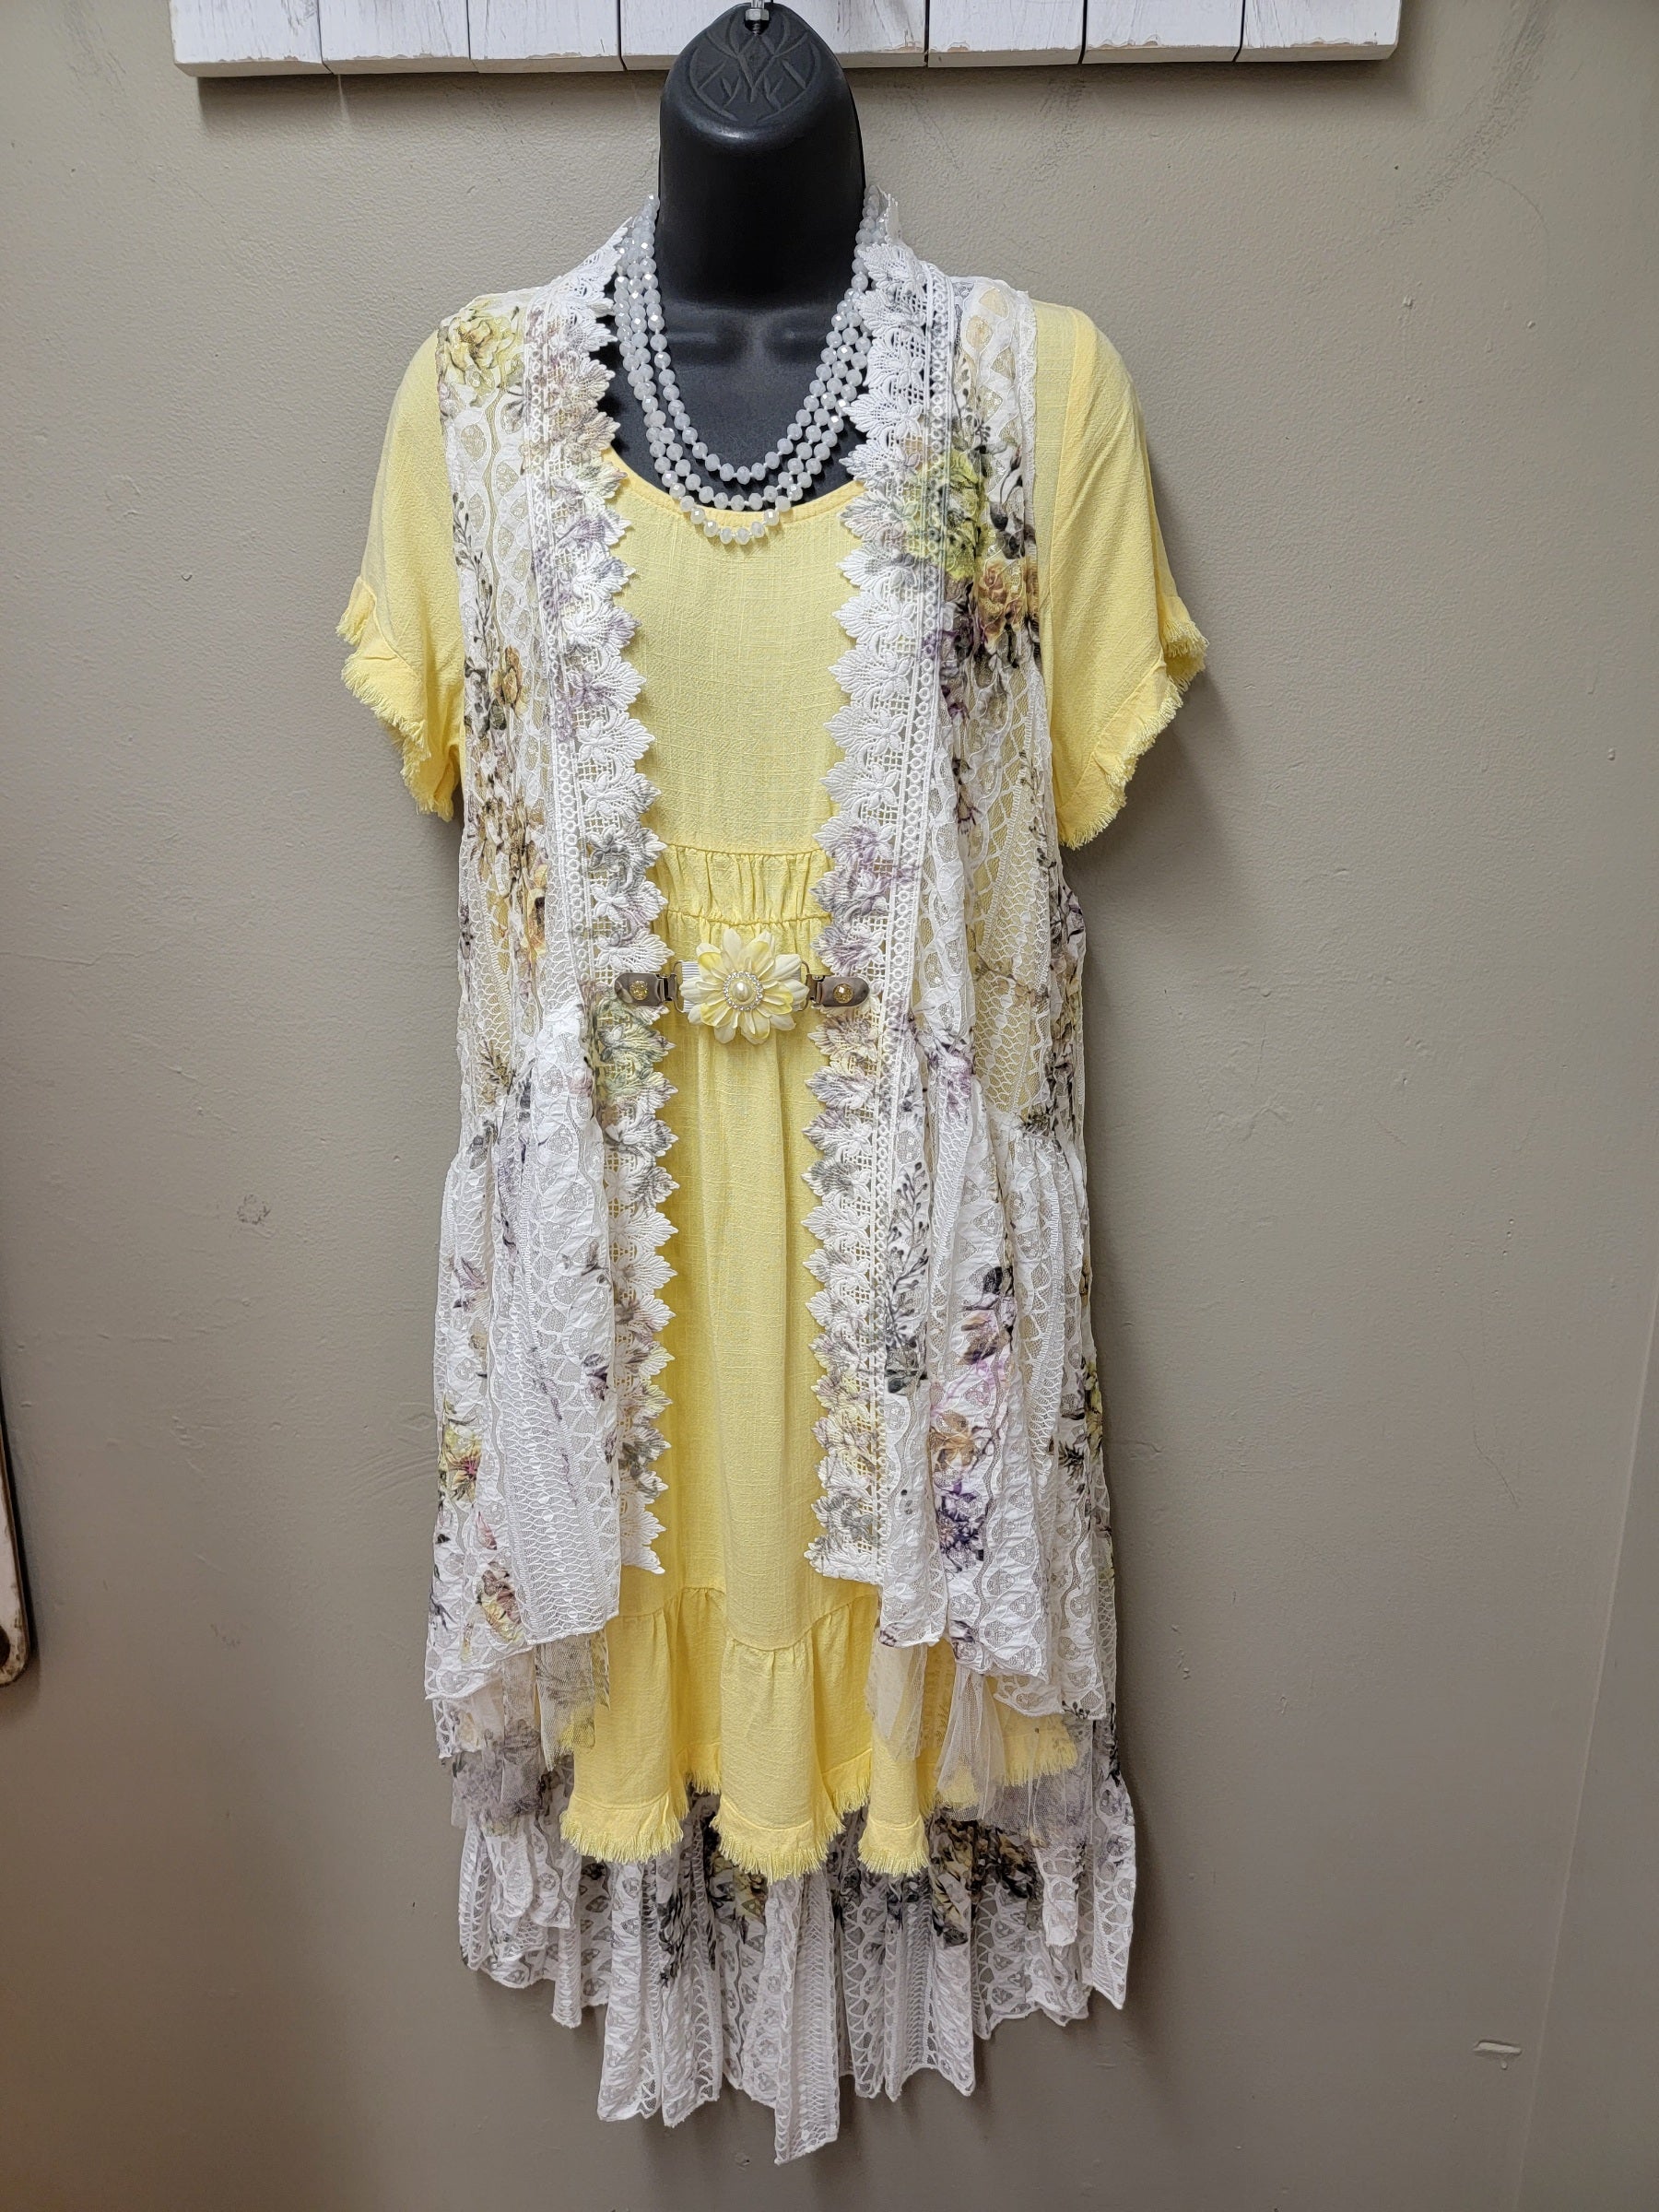 Exquisite  Lace Vest with Yellow Roses on Ivory